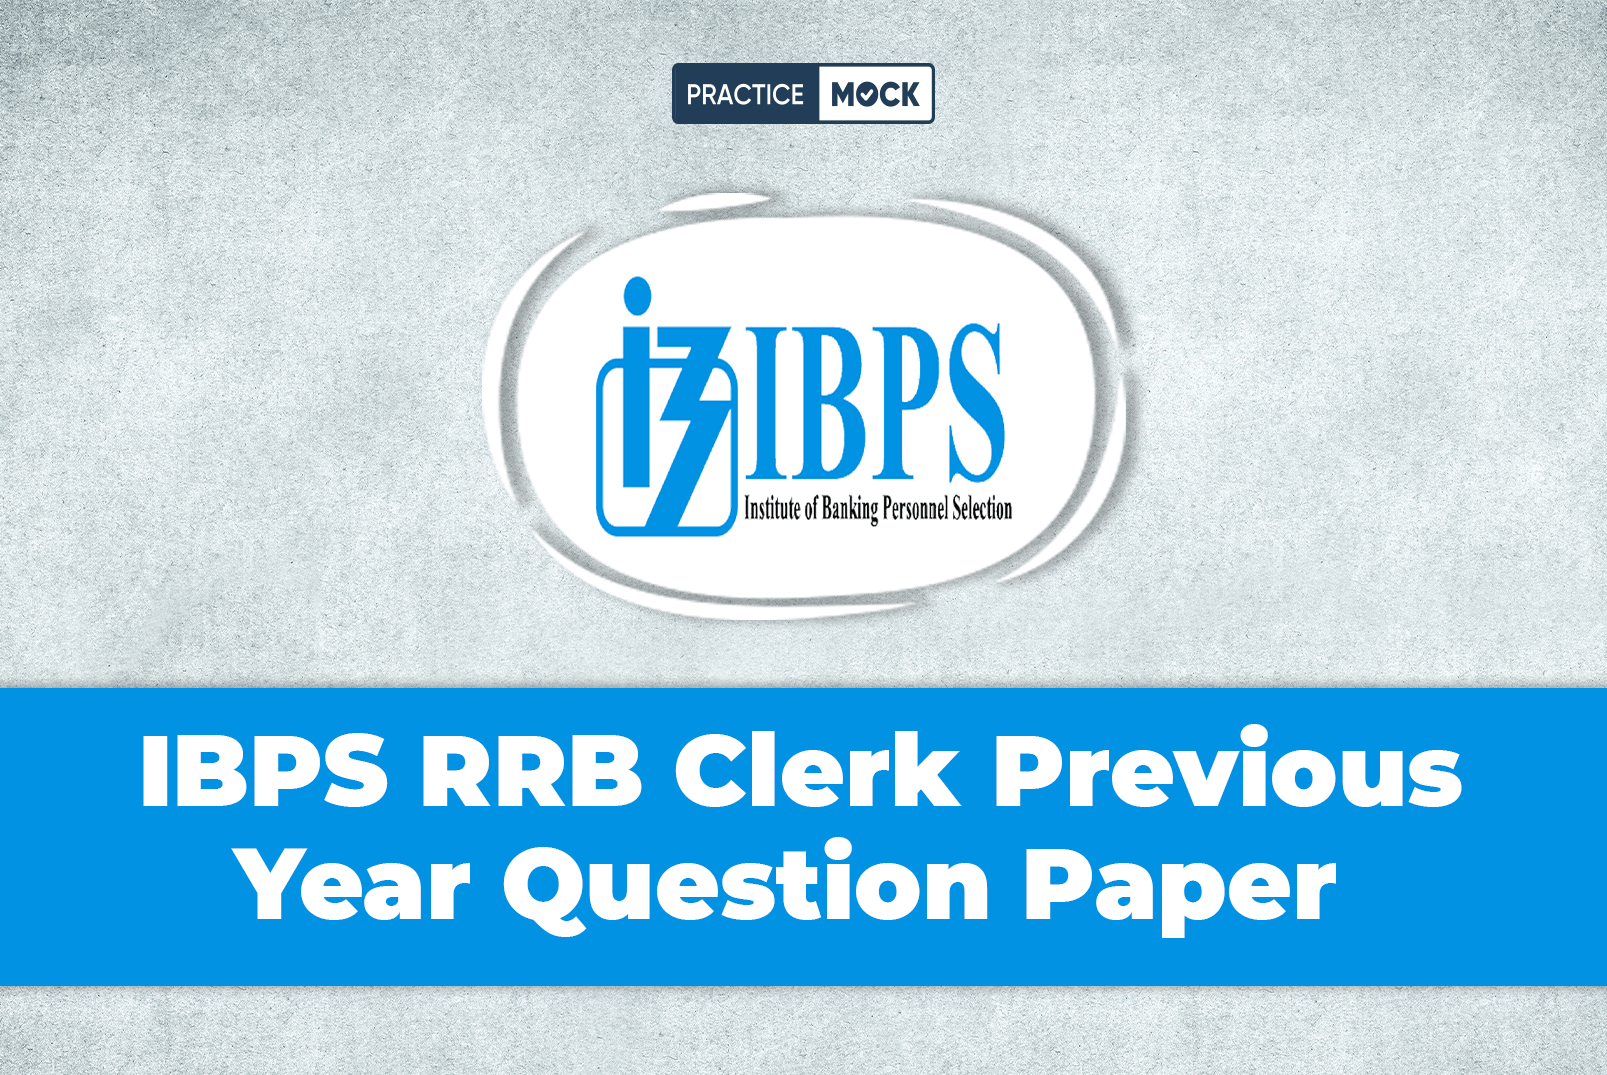 IBPS RRB Clerk Previous Year Question Paper